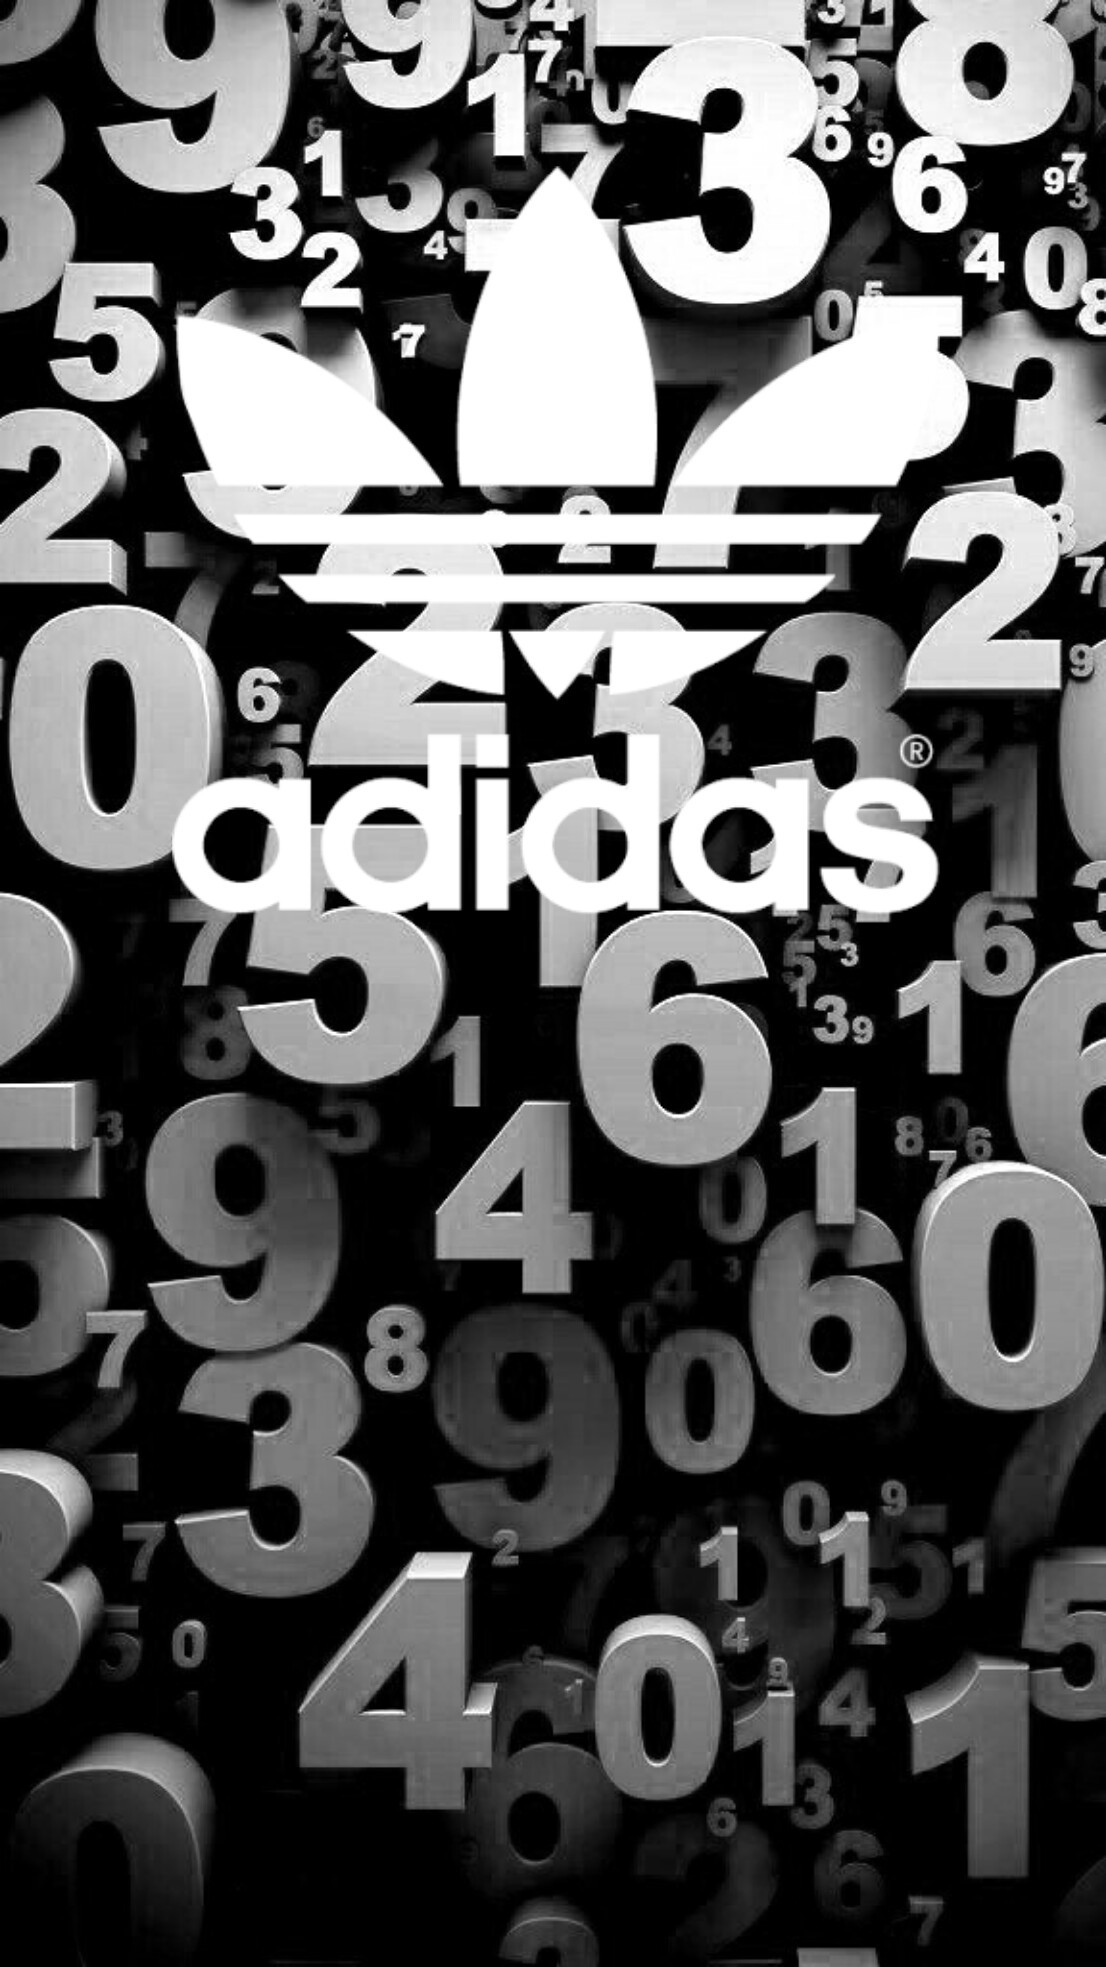 1106x1967 #adidas #black #wallpaper #android #iphone